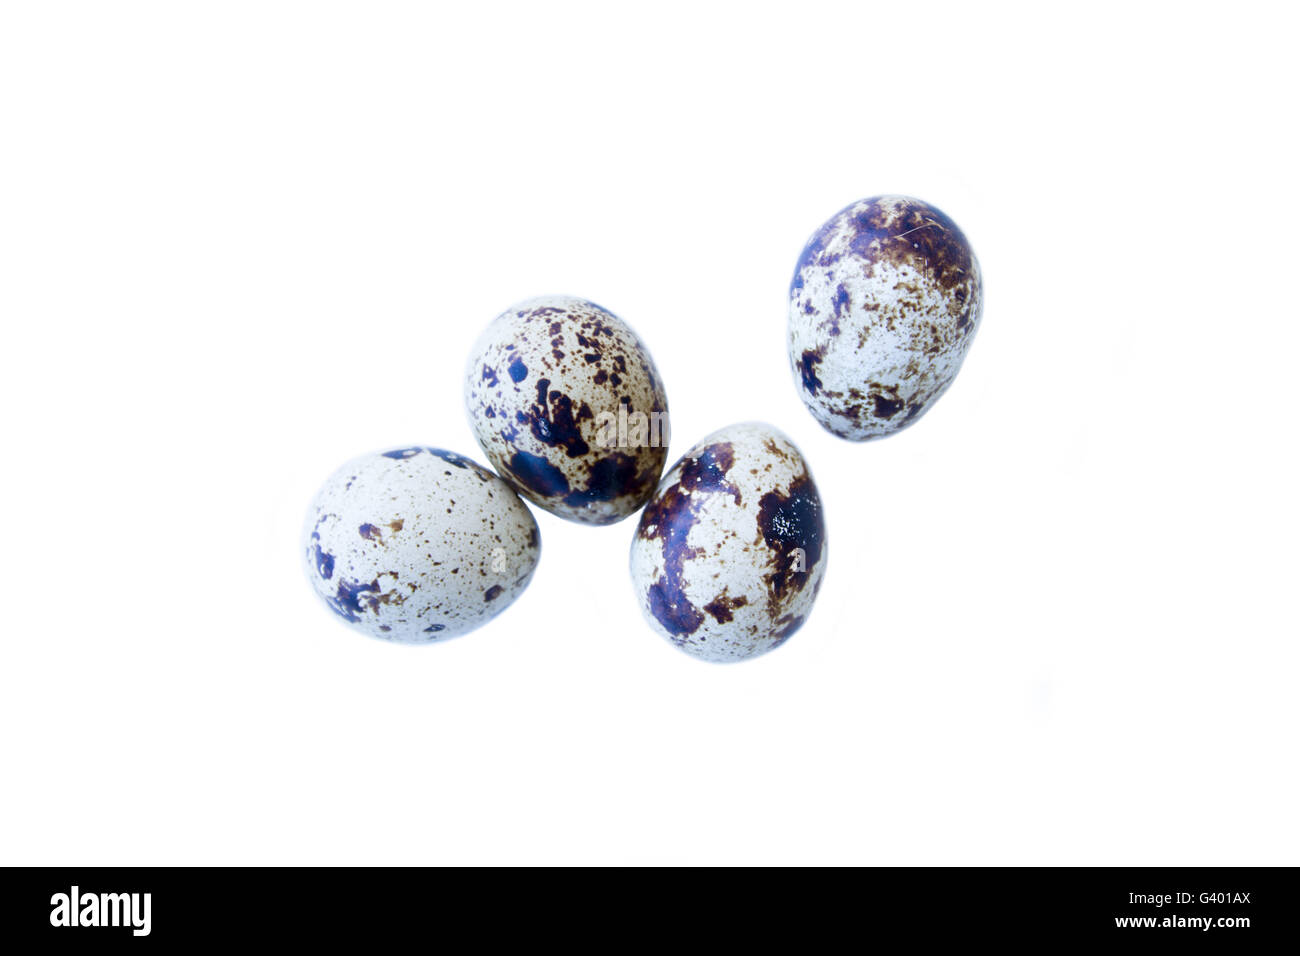 Some quail eggs on a white background seen from above Stock Photo